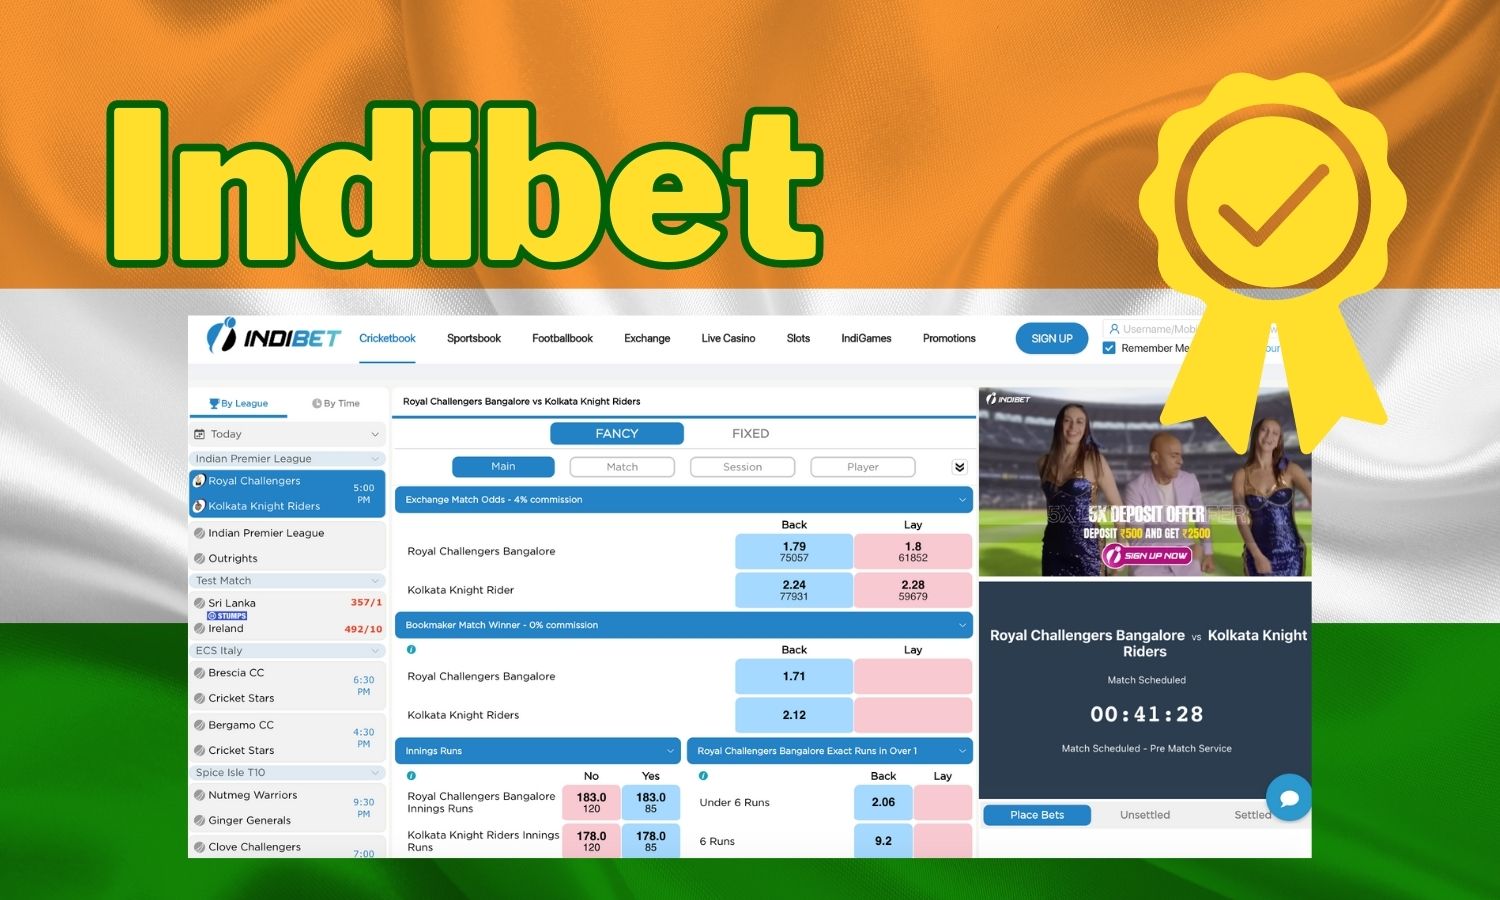 Indibet website overview and guide for betting in India